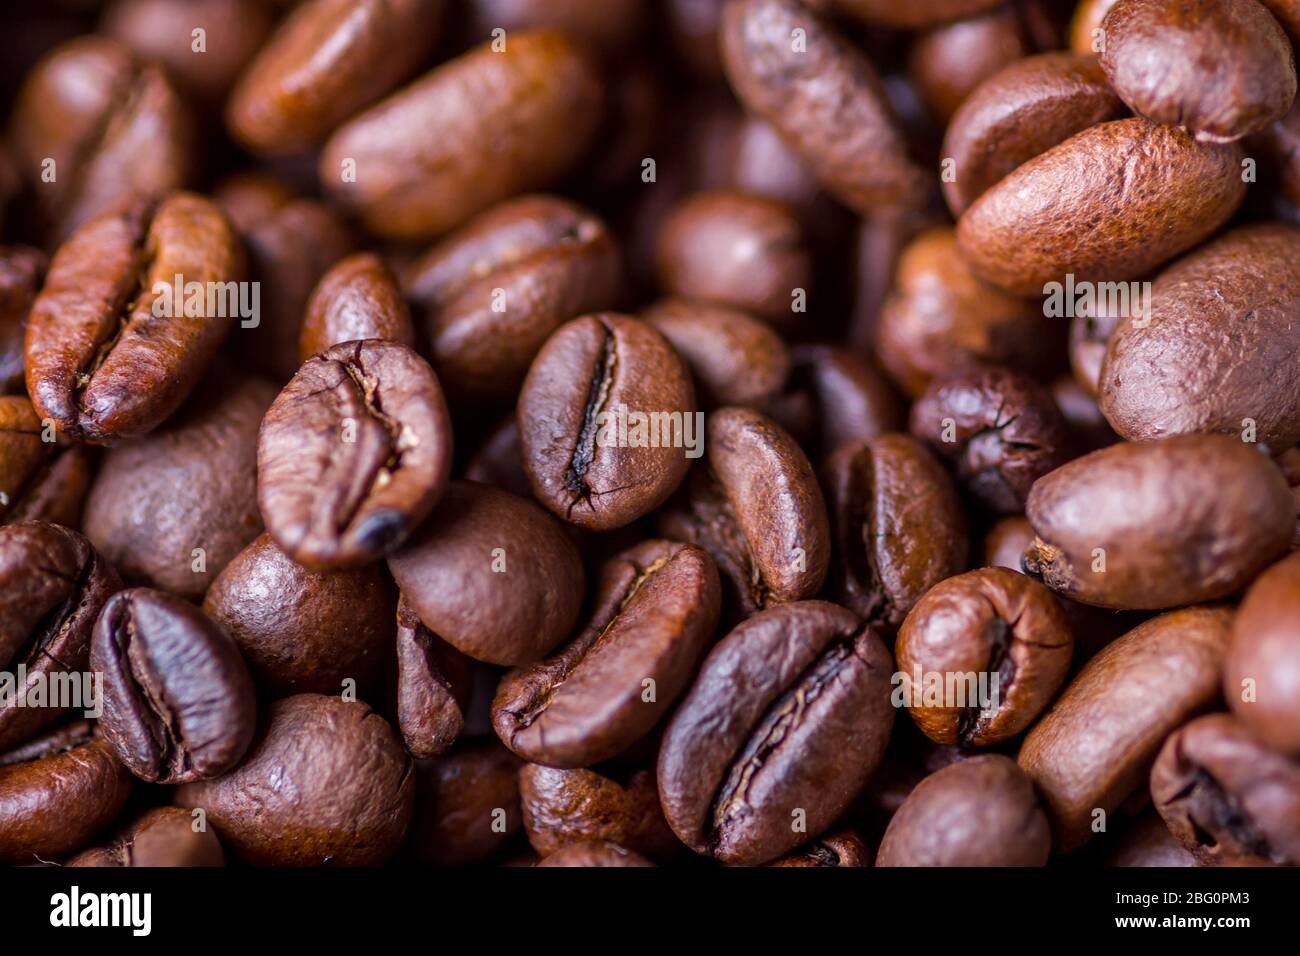 Texture of coffee beans close-up view from above Stock Photo